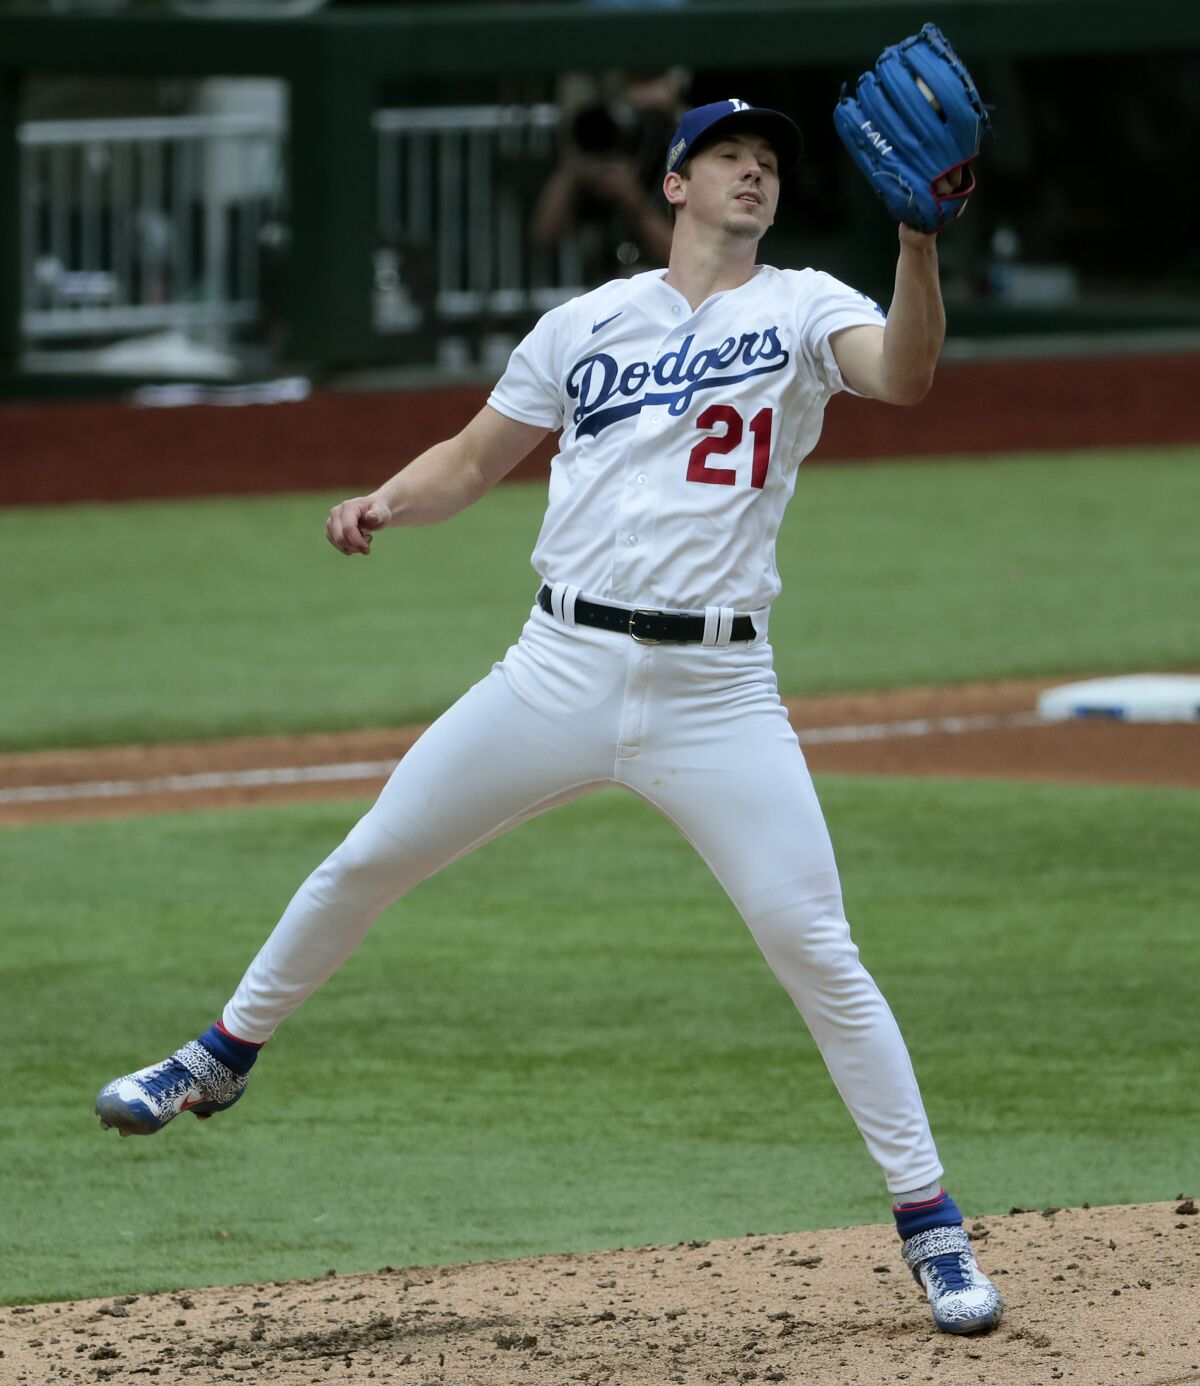 Dodgers starting pitcher Walker Buehler snags a bouncer by Atlanta's Nick Markakis.